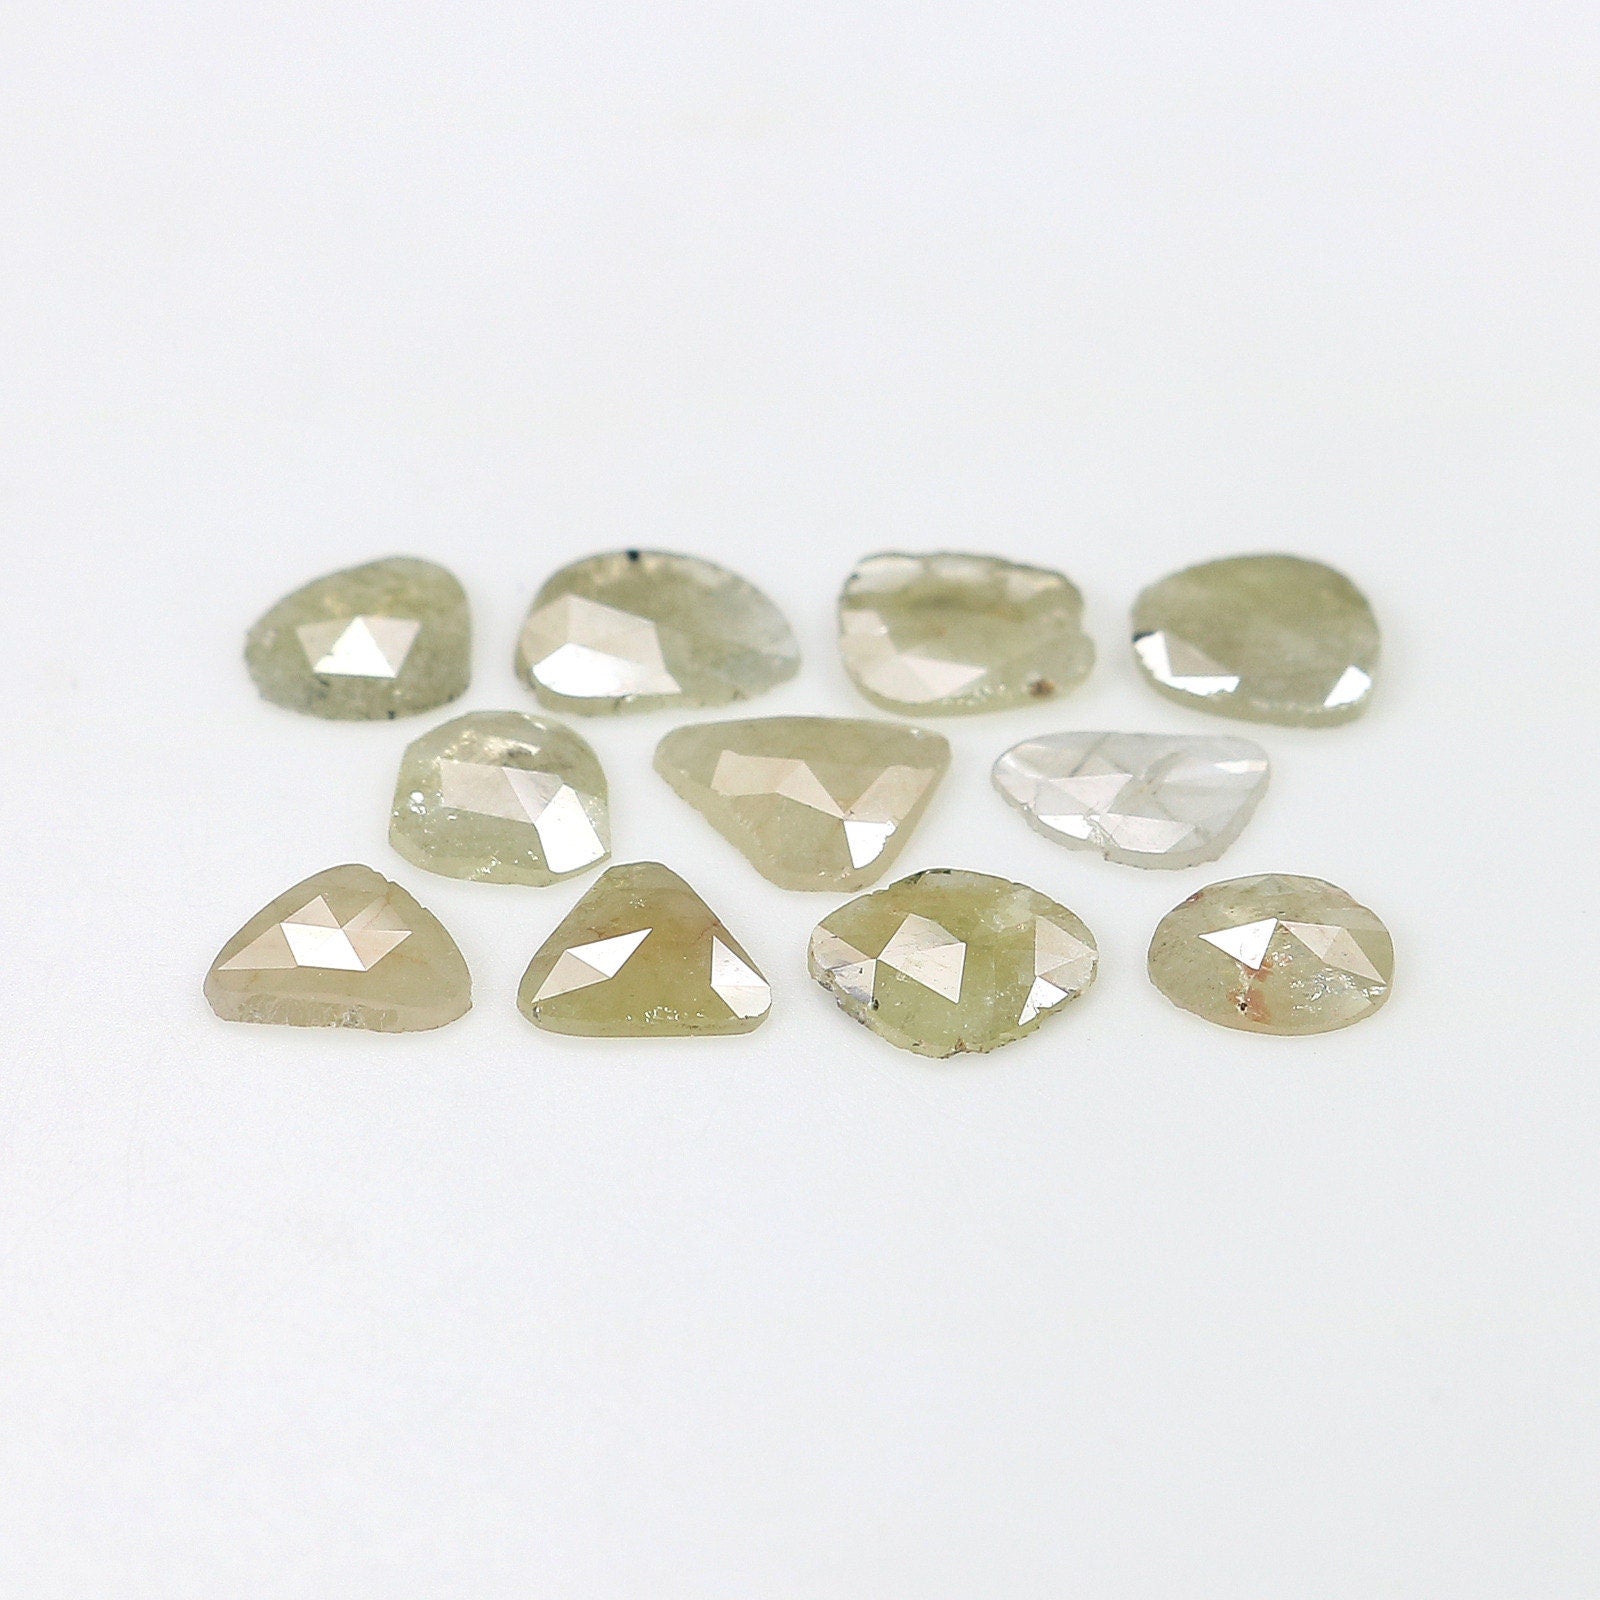 4.88 Ct (11 pieces) of Slice lot for Sam Wilson